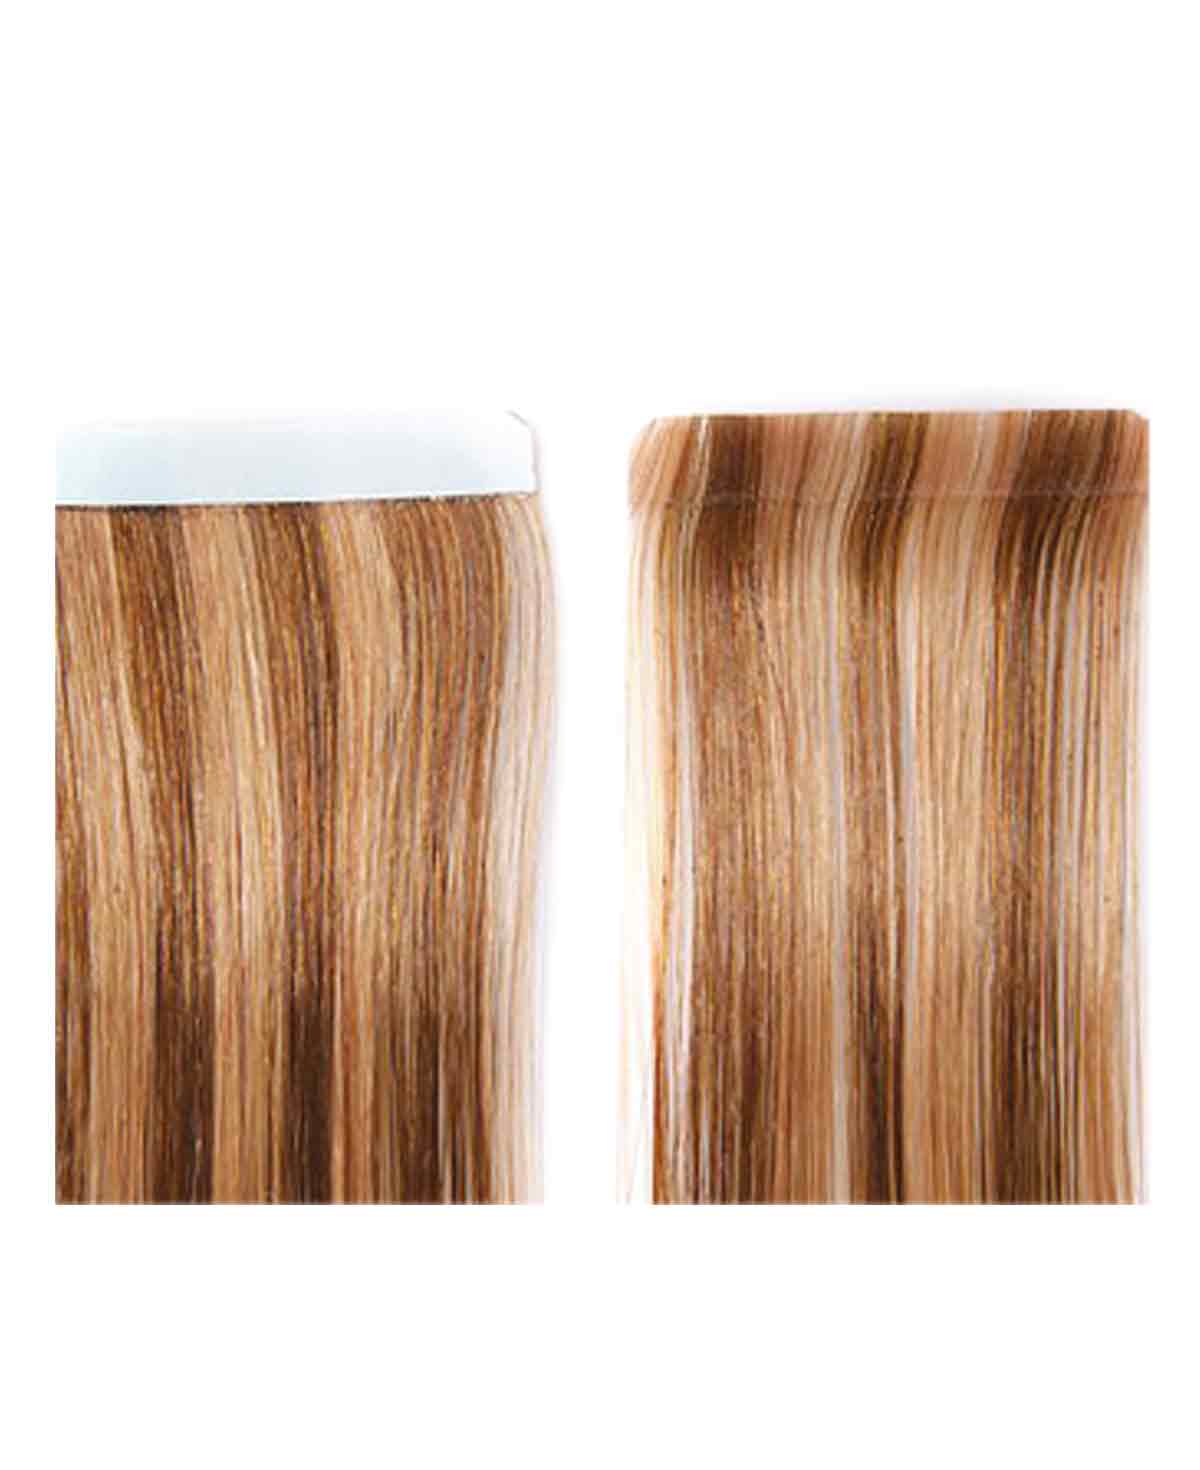 30-35cm (14") TAPE HAIR EXTENSIONS - MID BROWN HIGHLIGHT - 6G-8G